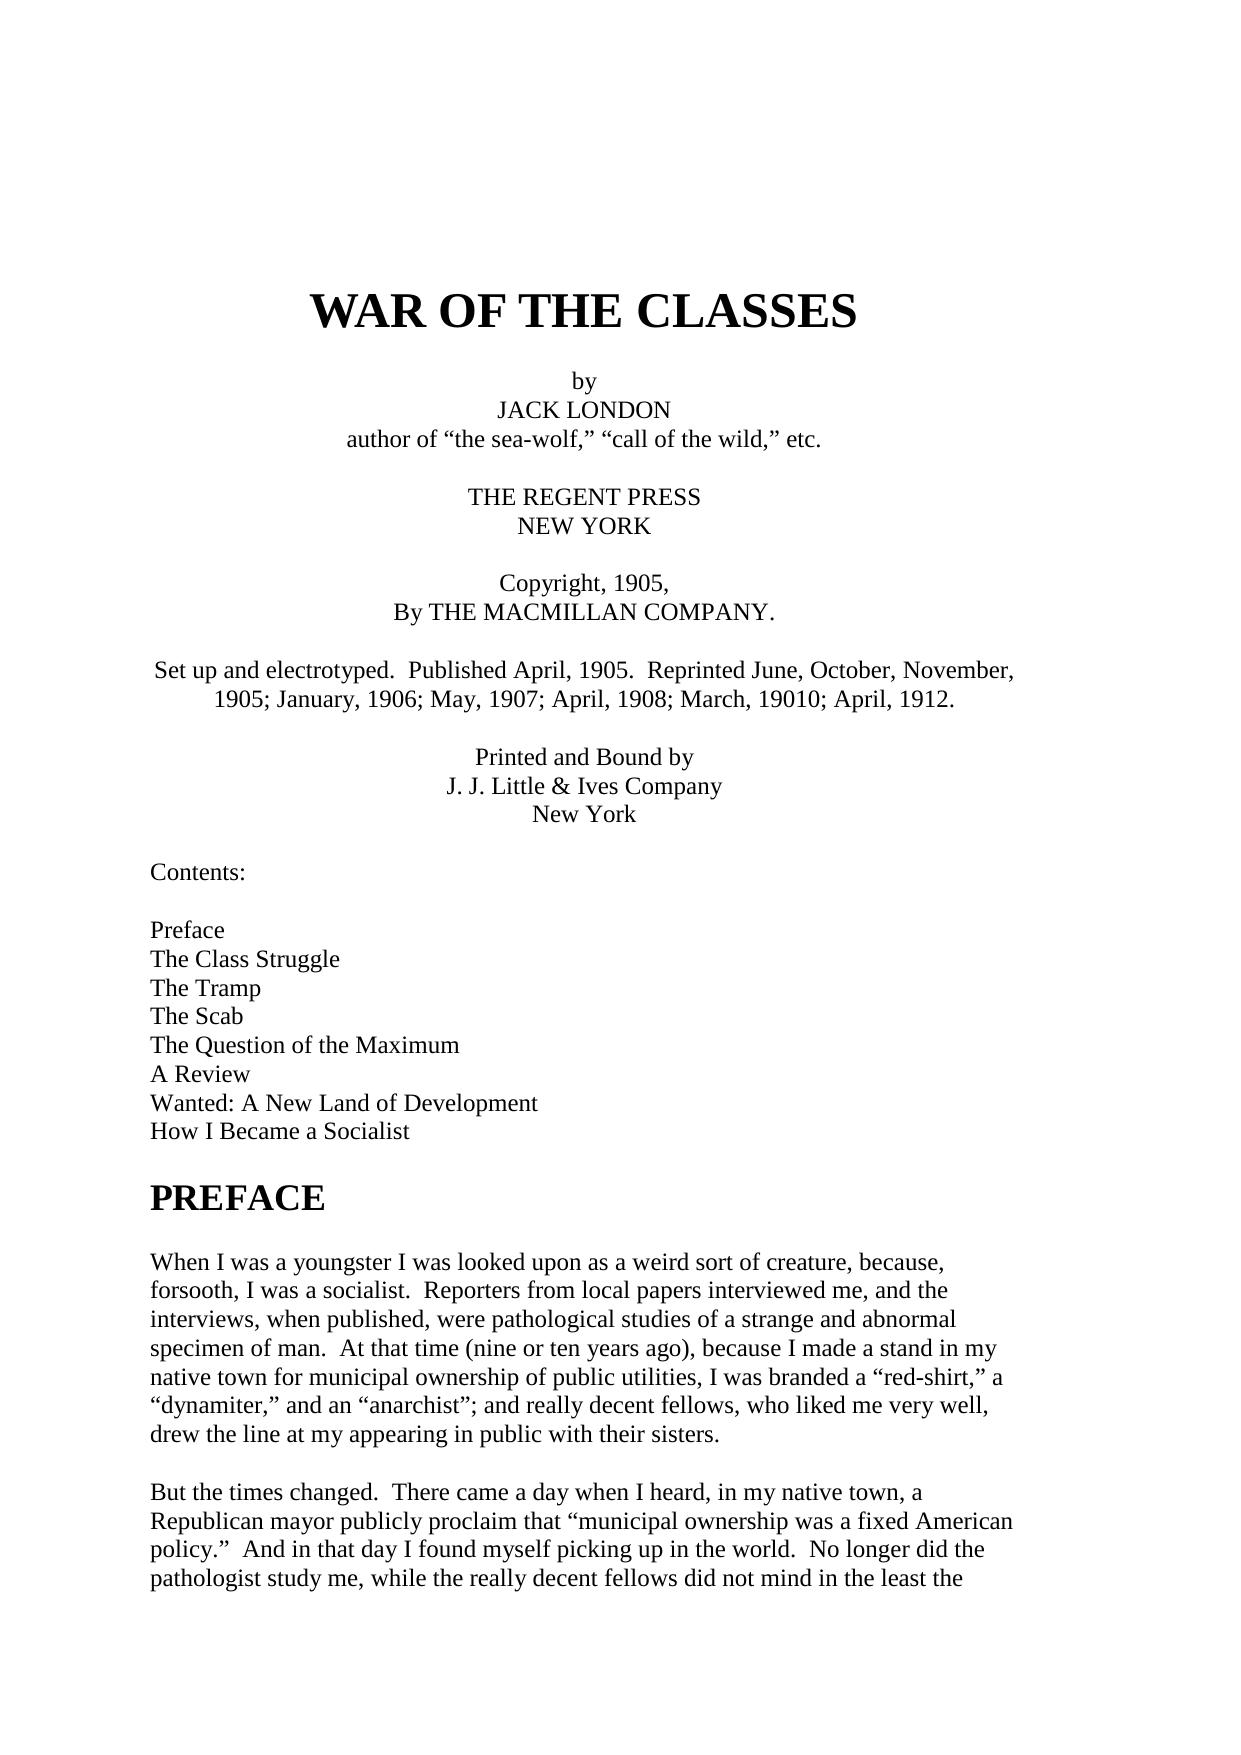 War of the Classes by Jack London